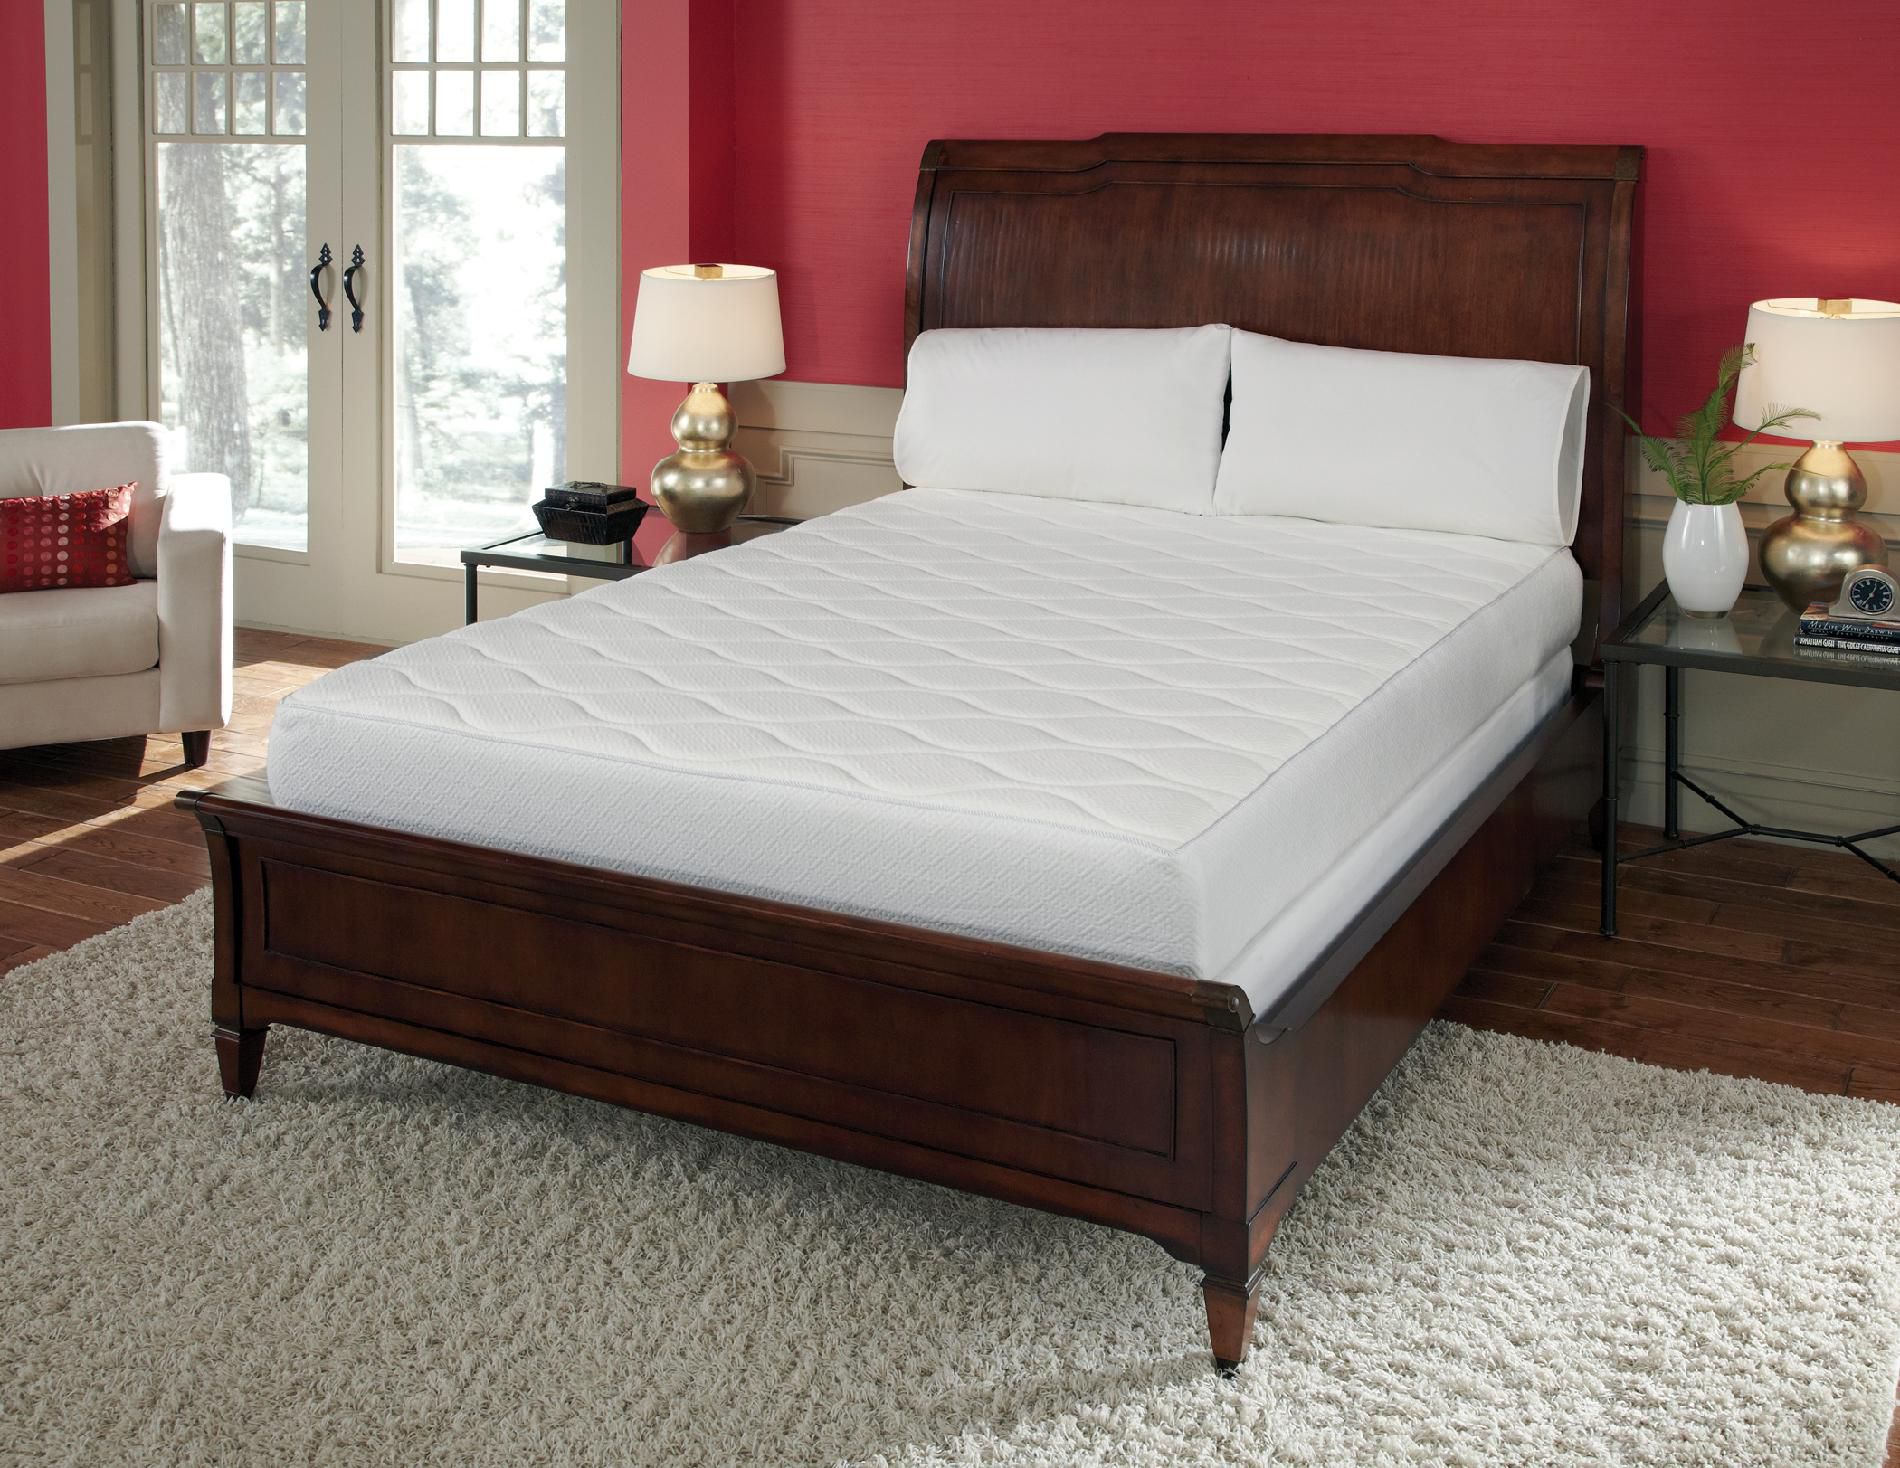 Pure Rest 10 inch Top Quilted Memory Foam Mattress: Full Size 10